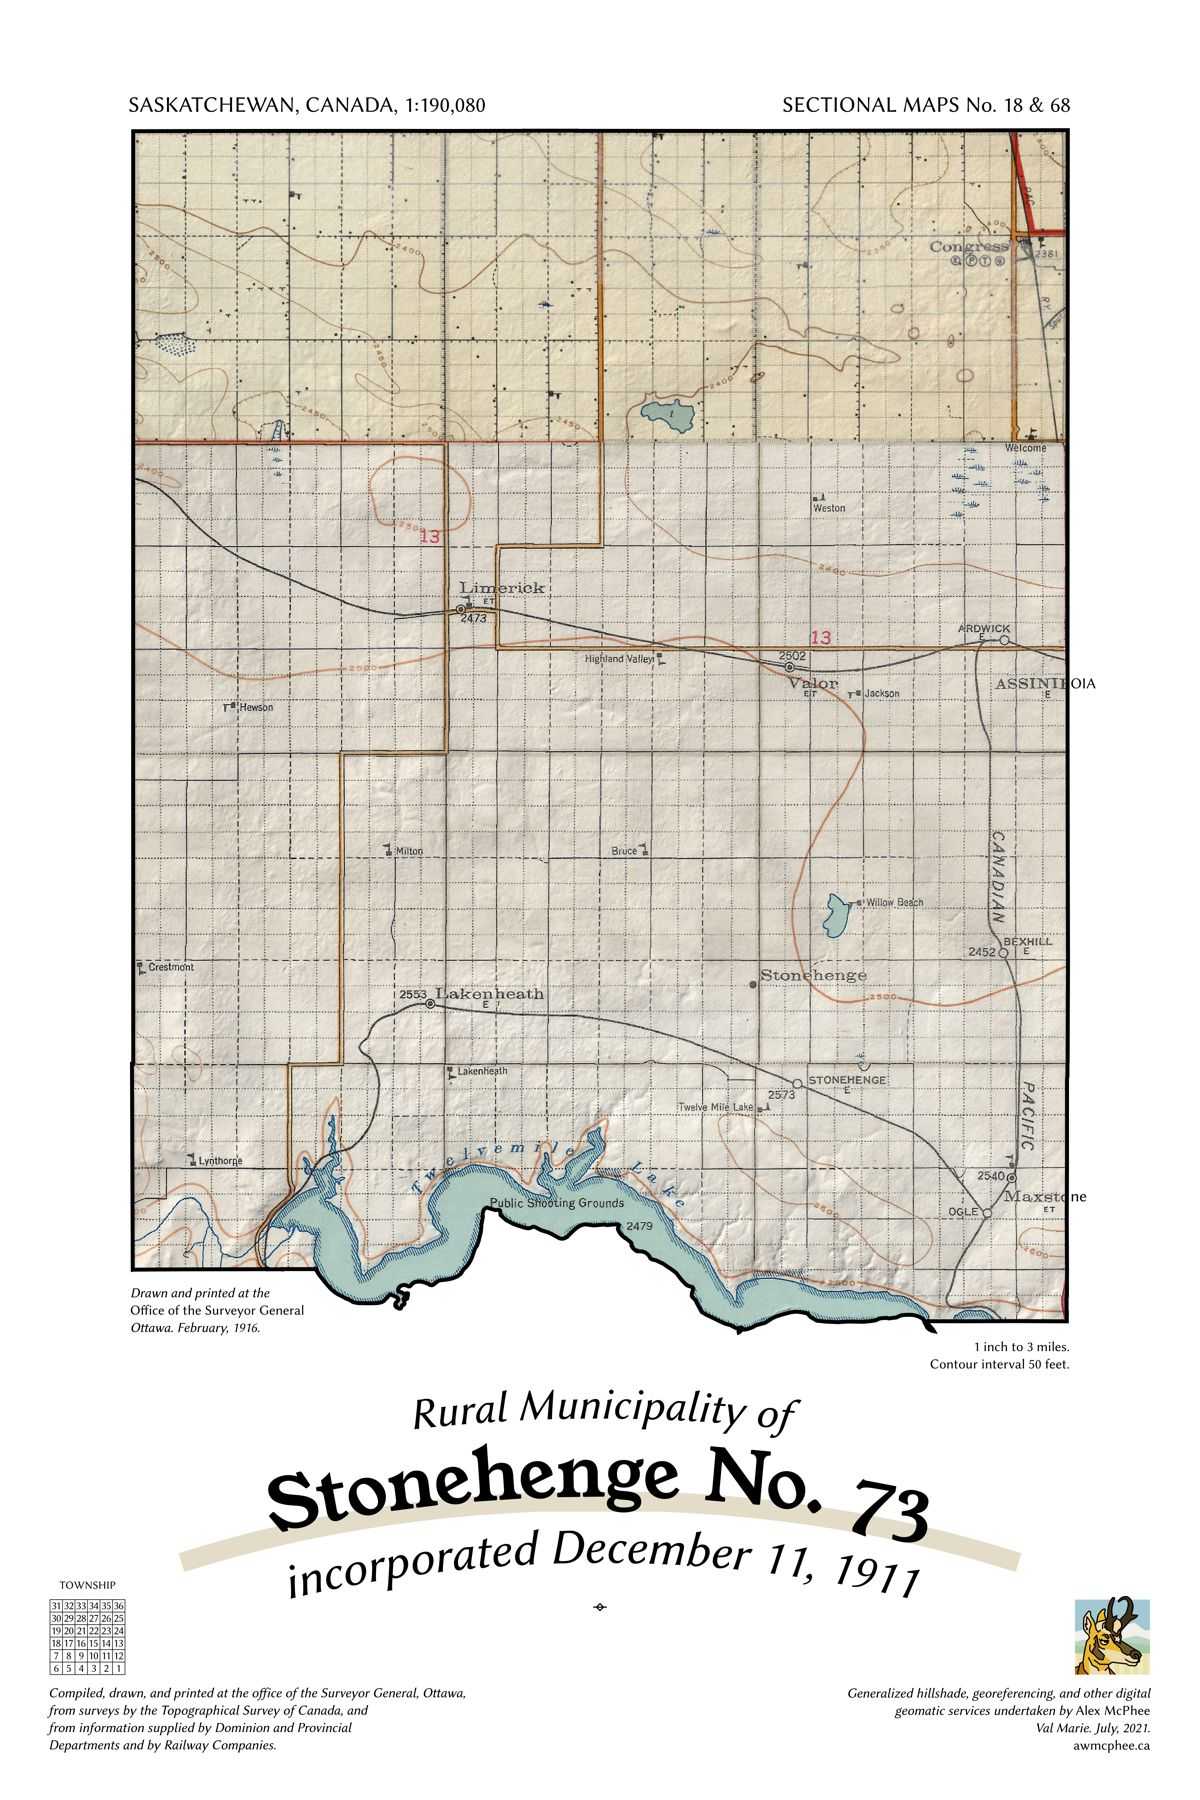 A map of the Rural Municipality of Stonehenge No. 73.